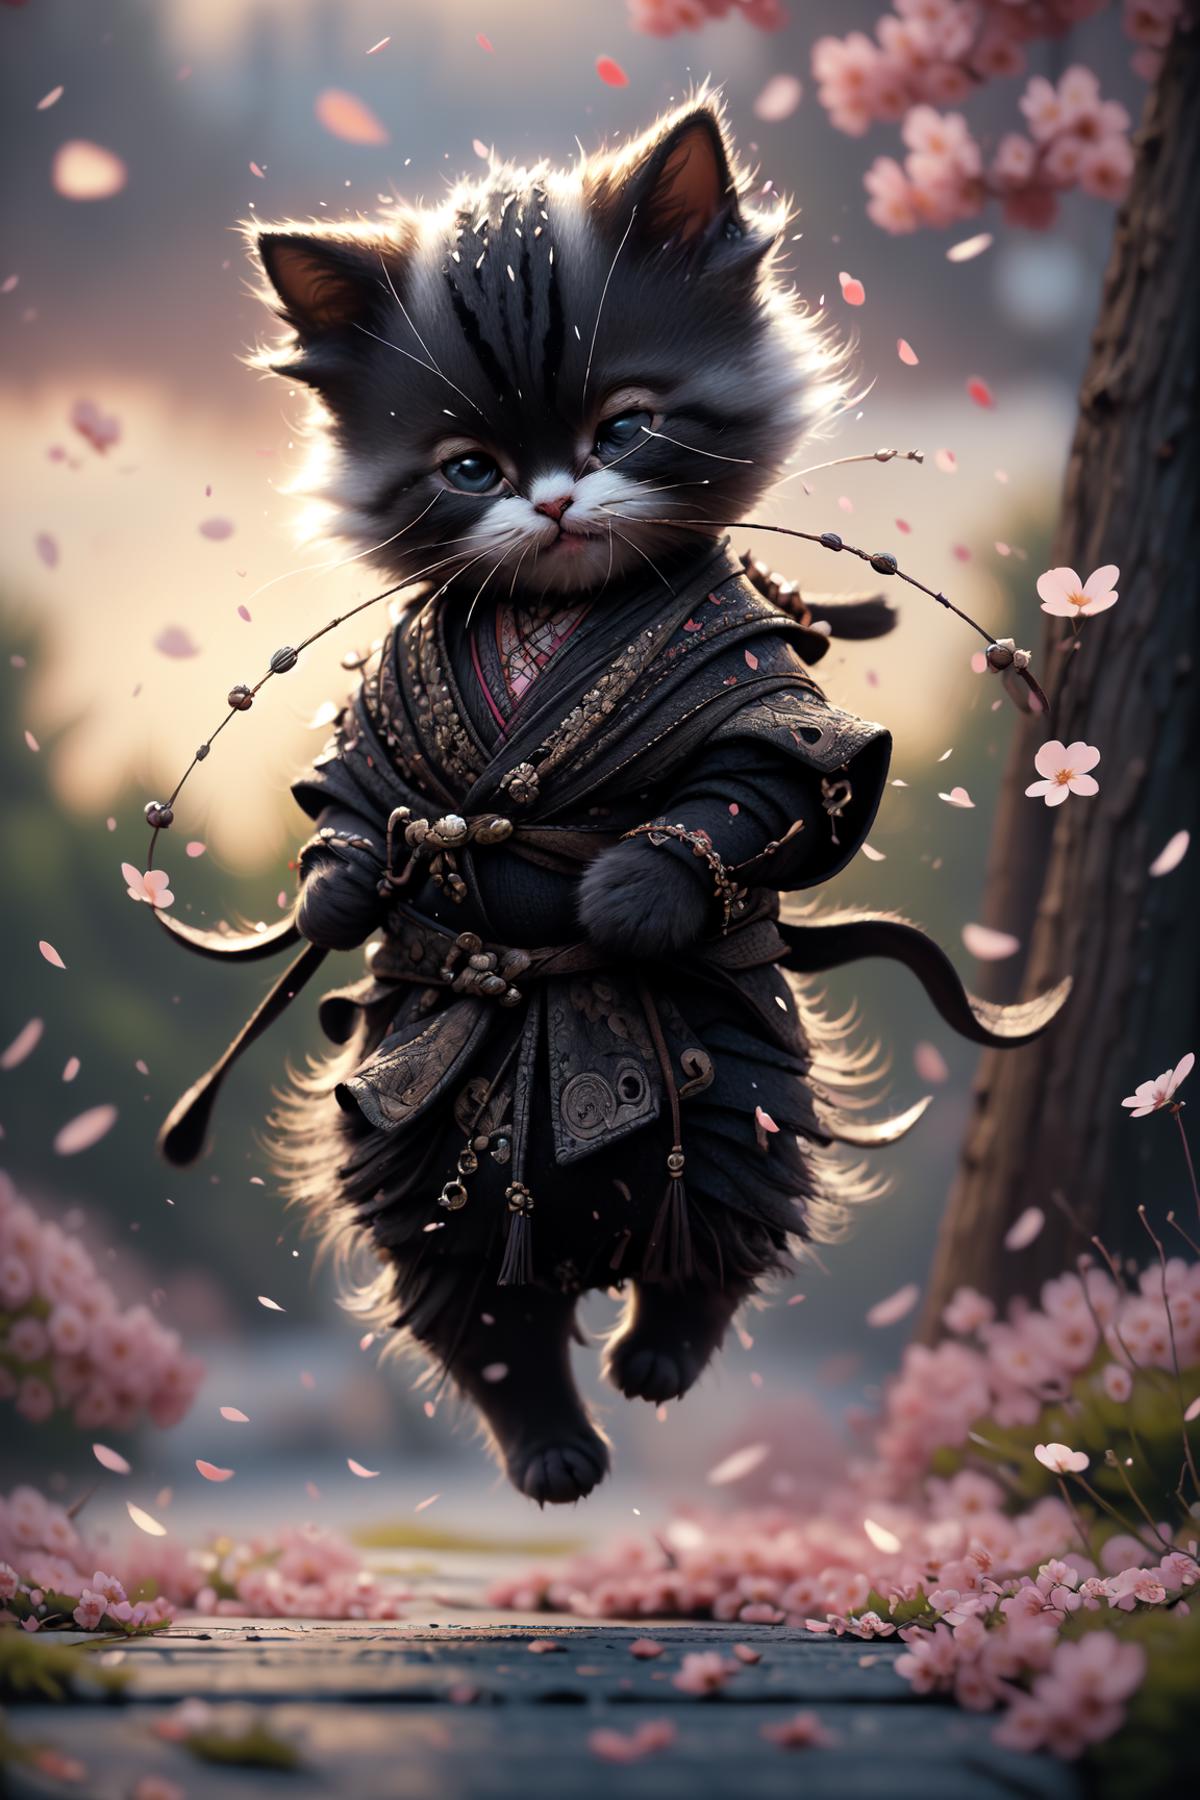 A kitten dressed up in a kimono and holding a cat toy, surrounded by cherry blossoms.